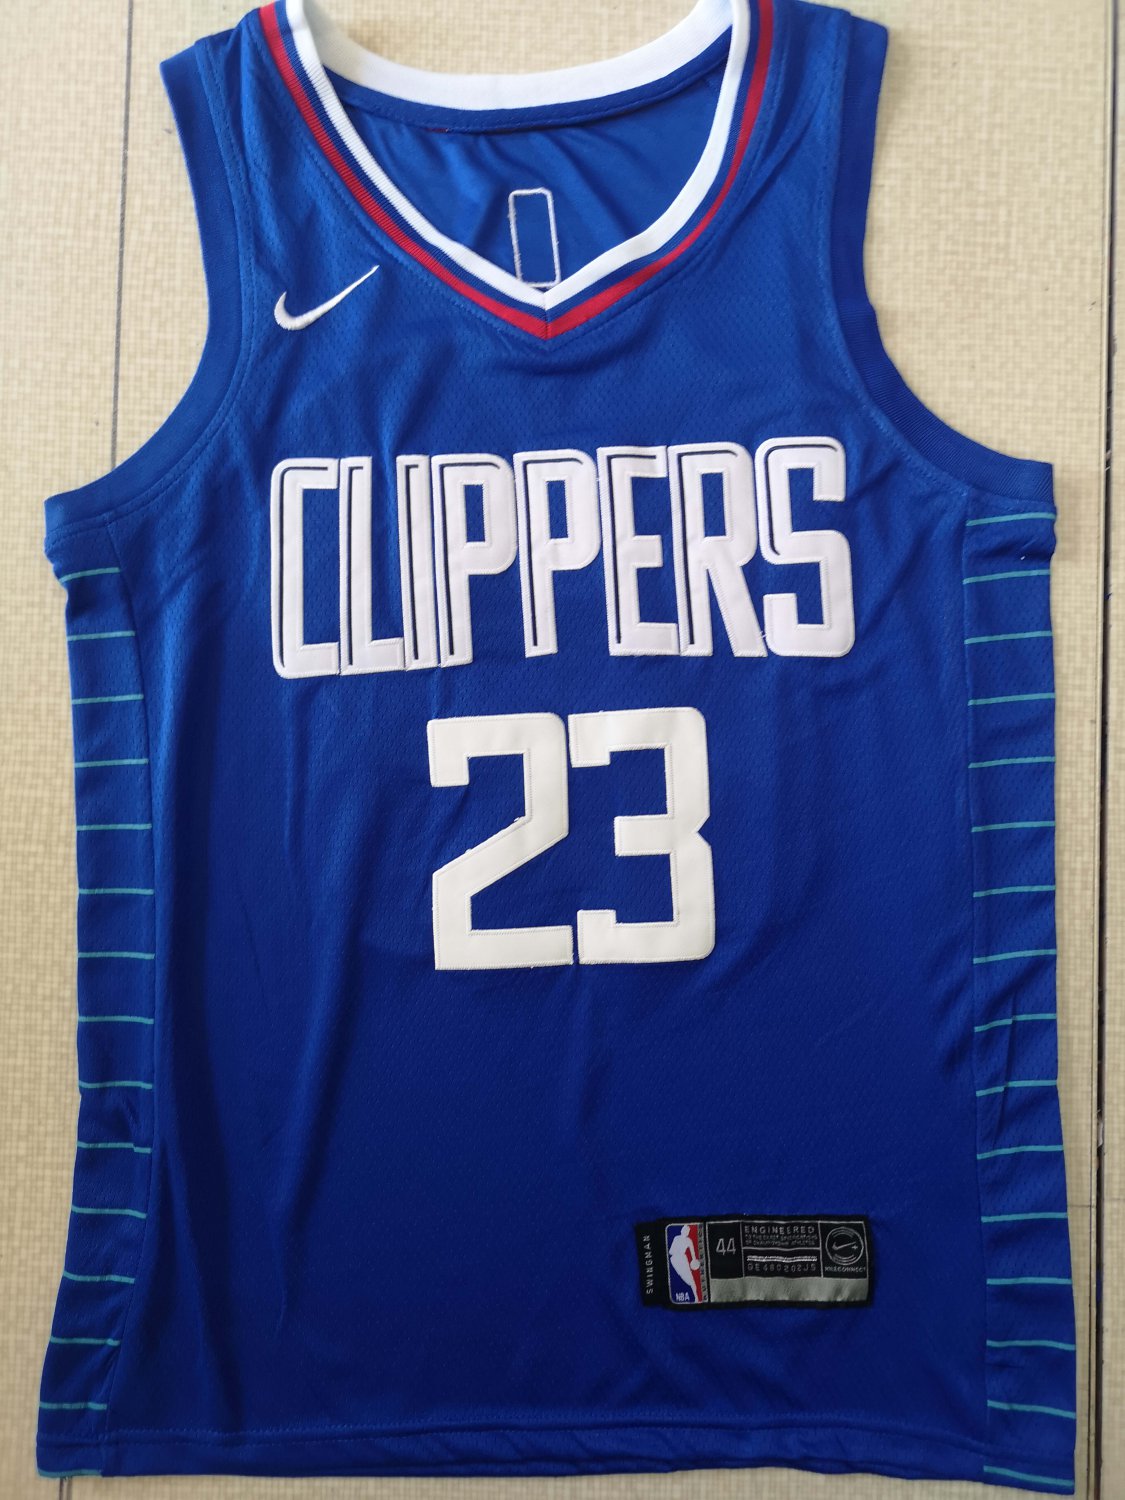 clippers new jersey 2019